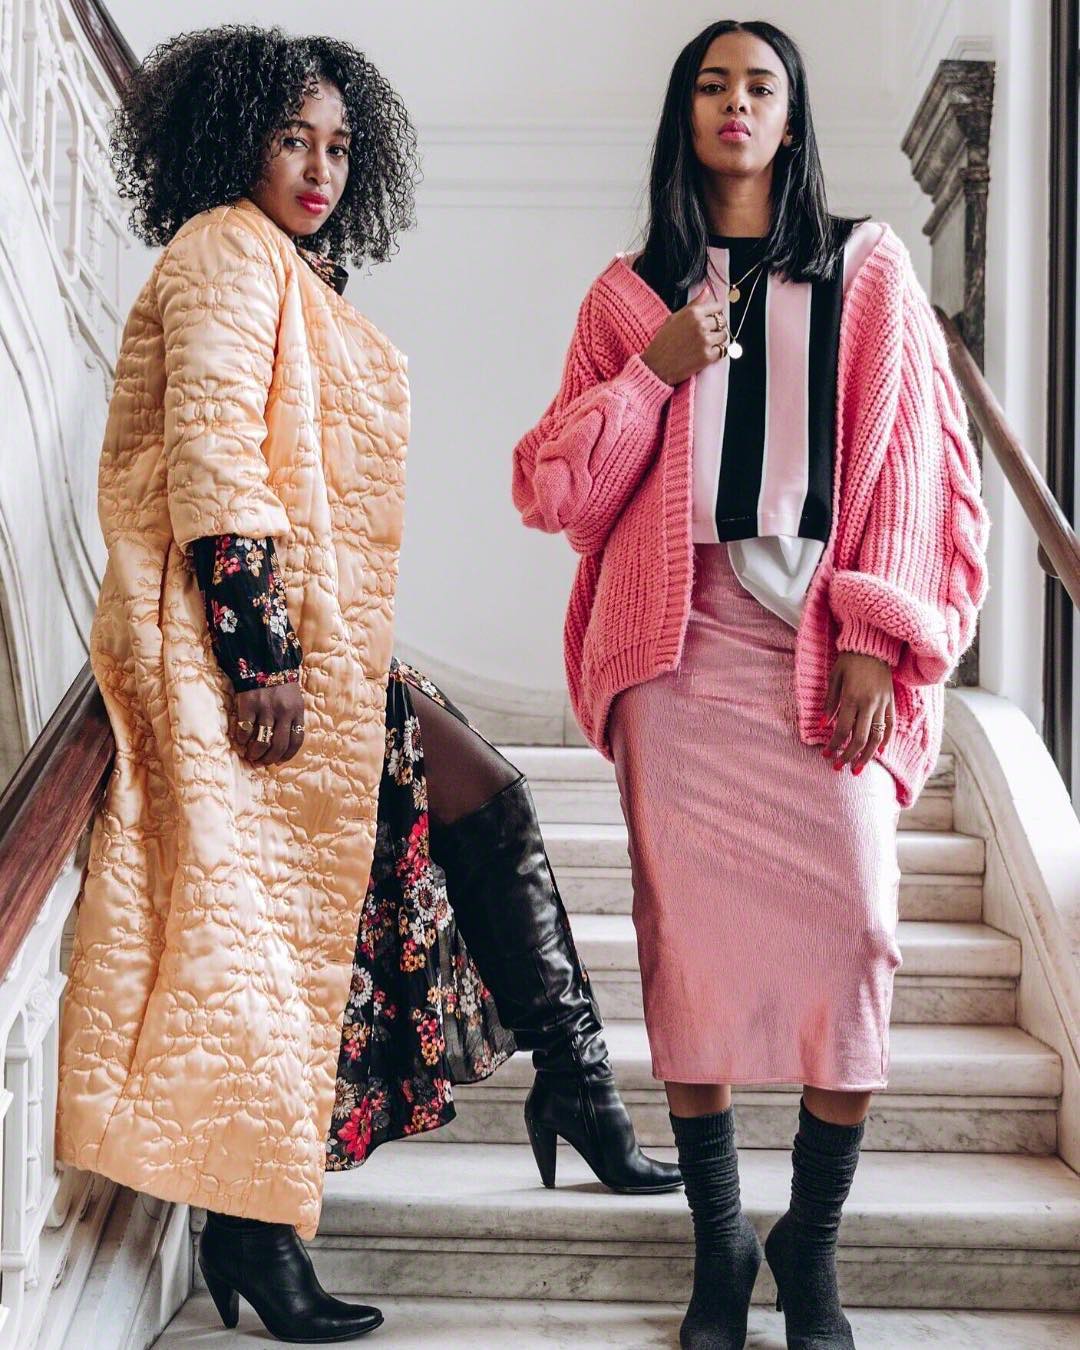 These Somalian Sister Bloggers Aim To Inspire Women Inside And Out